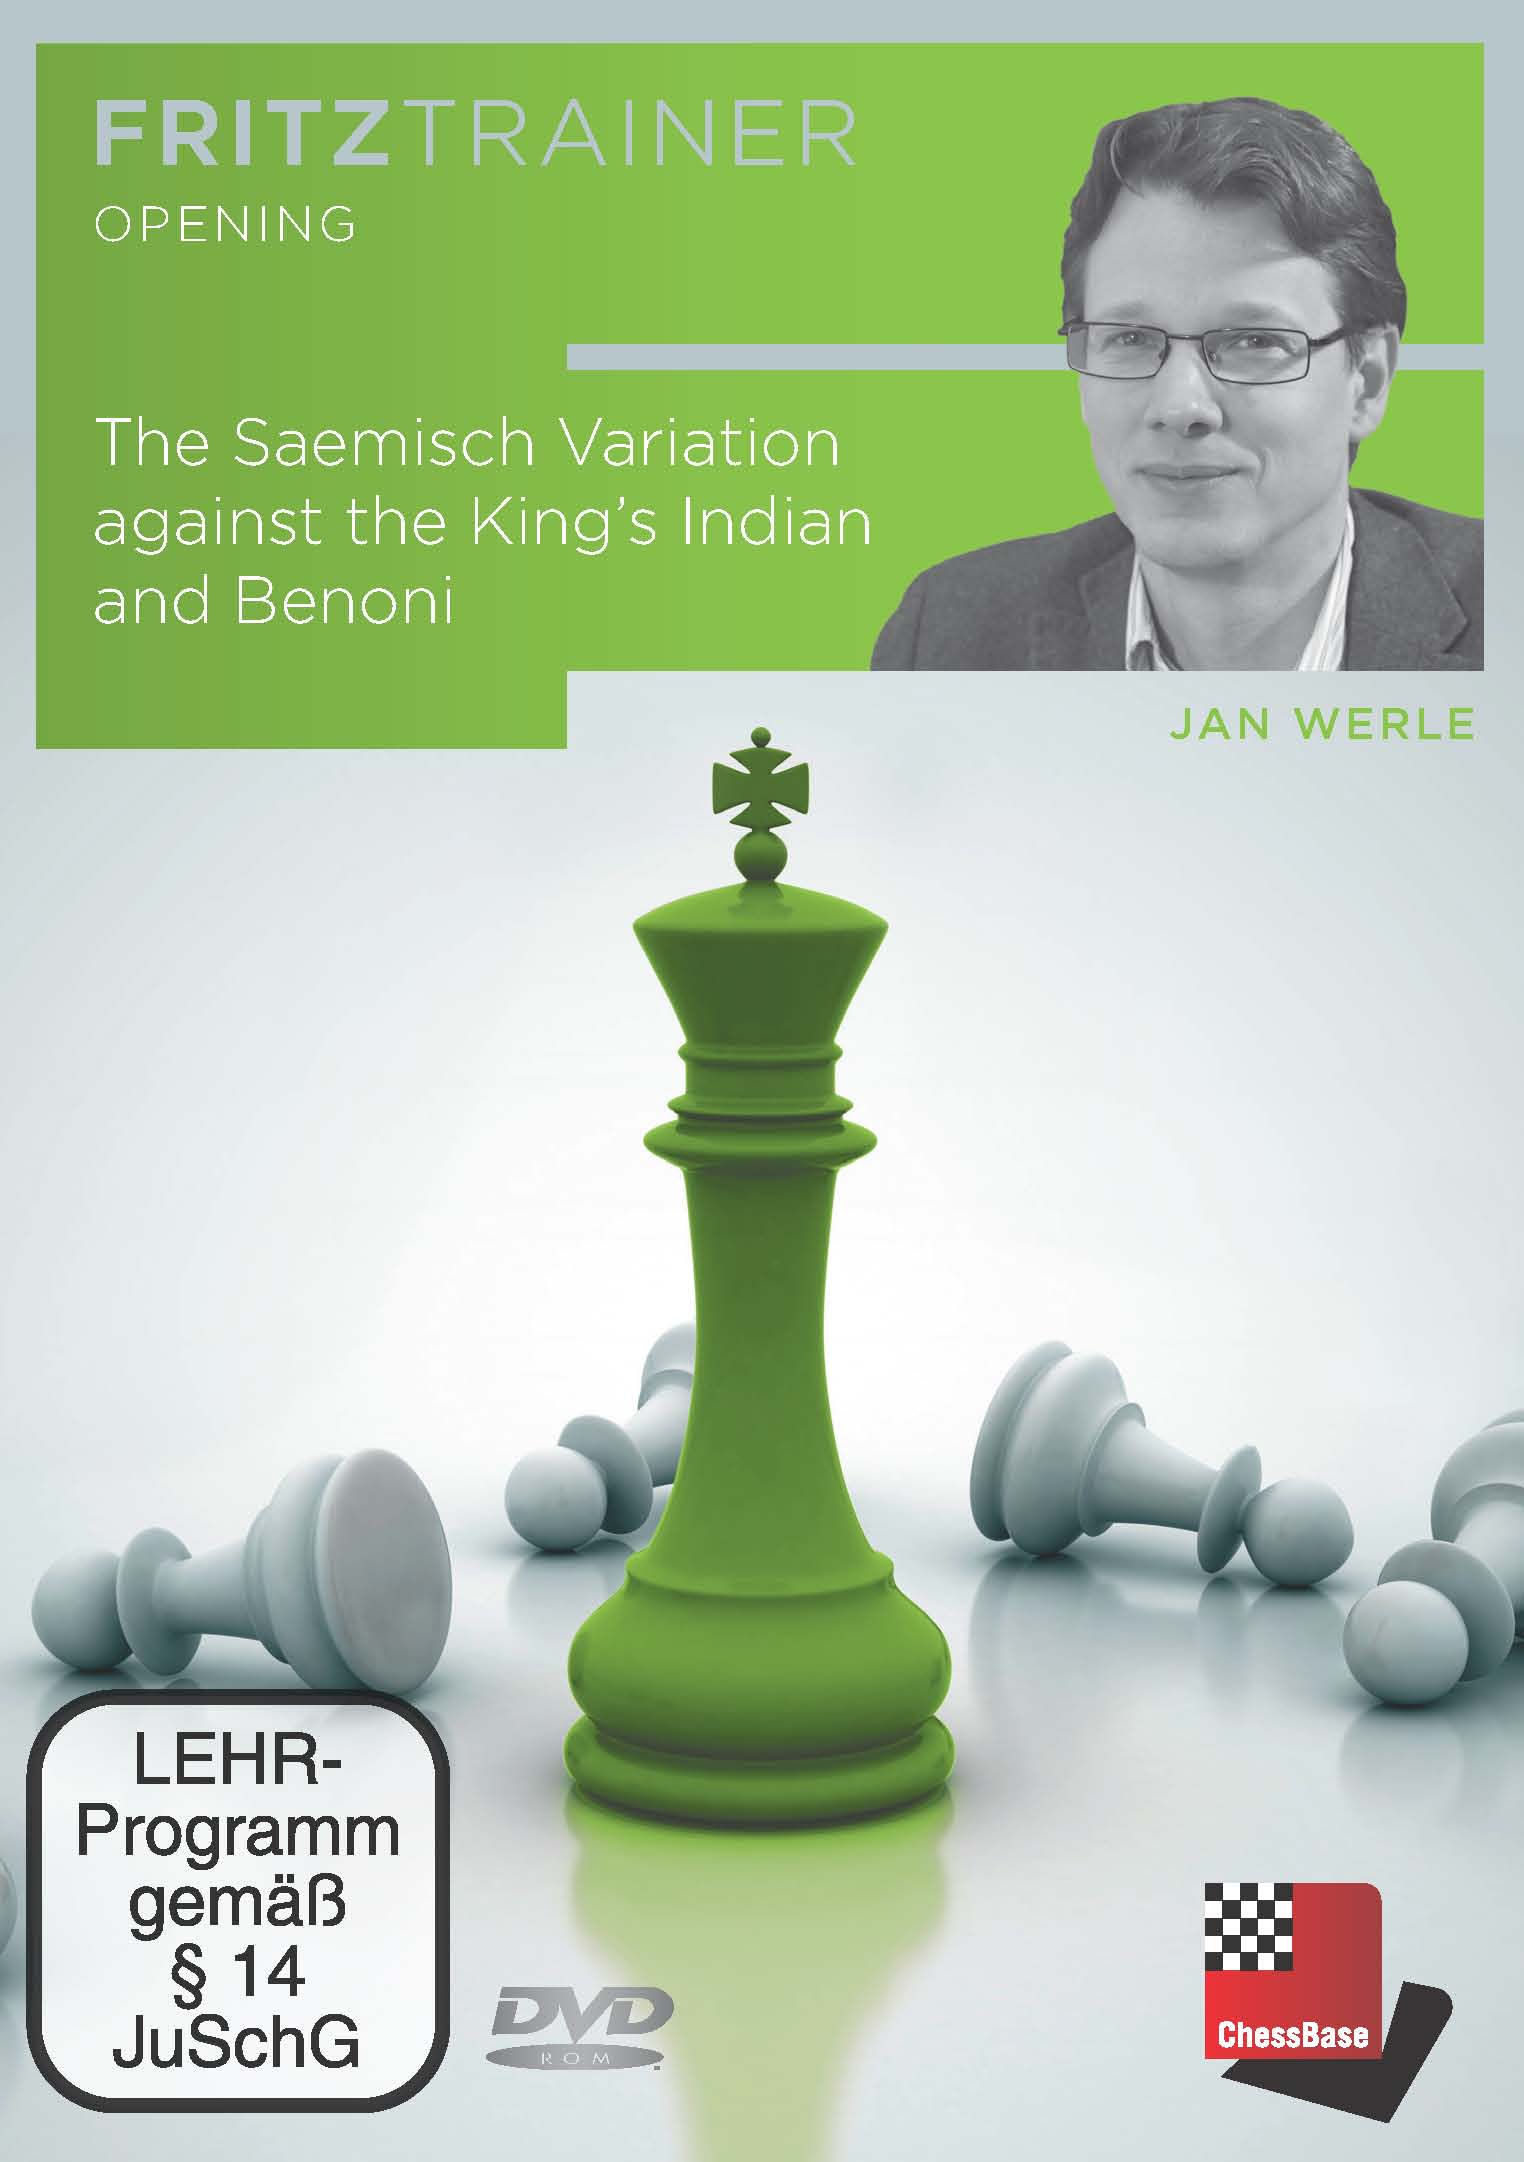 The Saemisch Variation against the King's Indian and Benoni